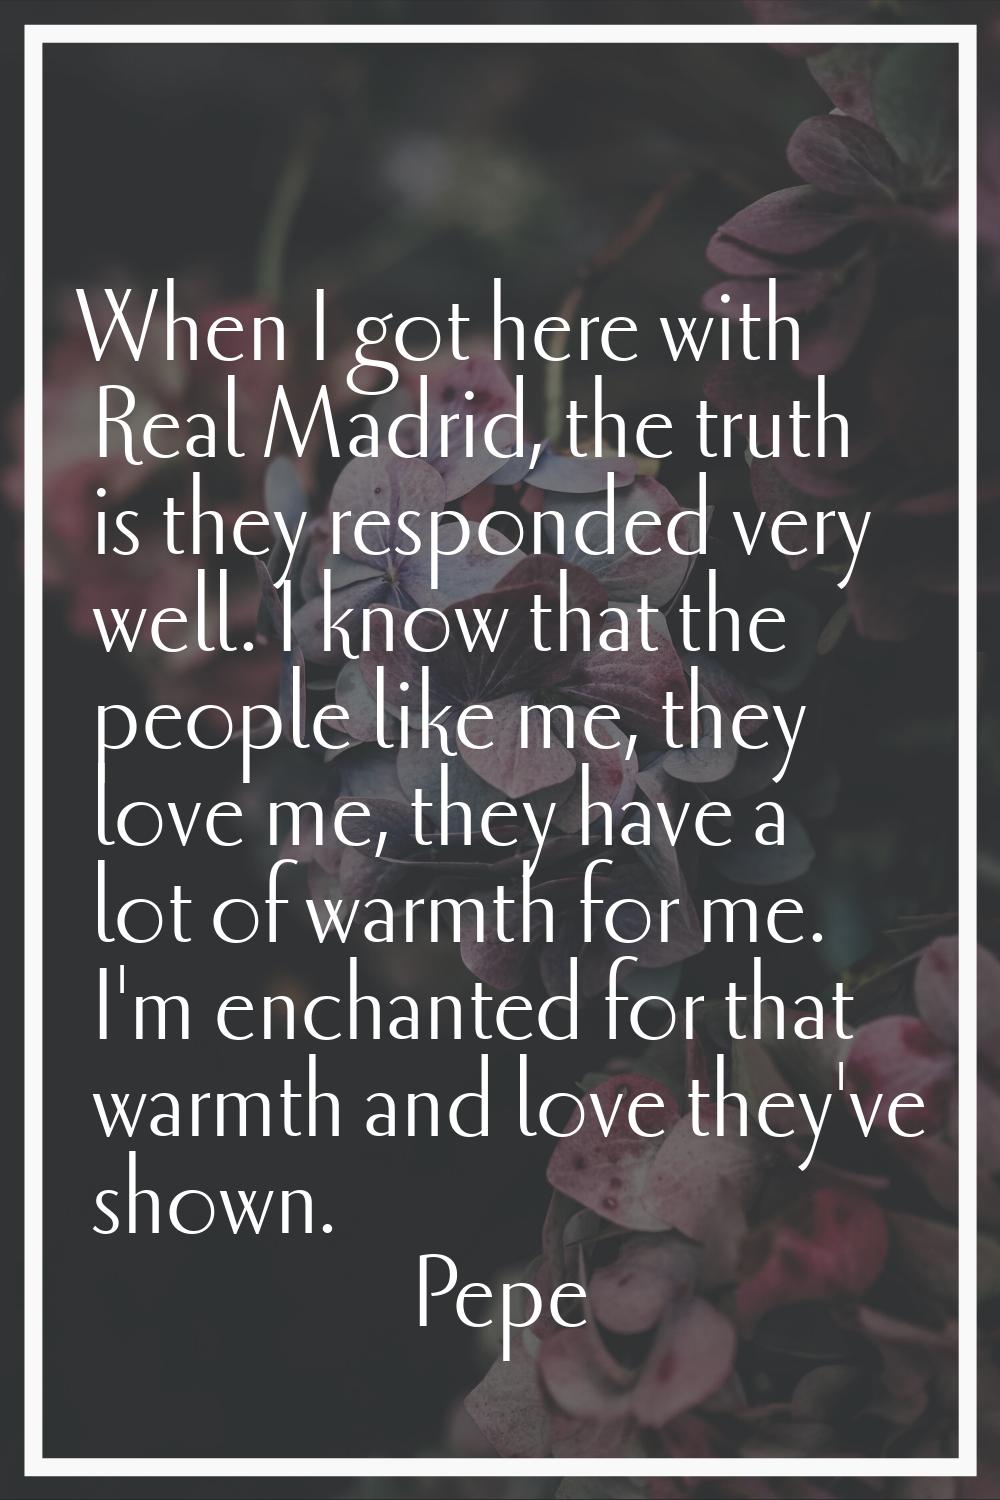 When I got here with Real Madrid, the truth is they responded very well. I know that the people lik